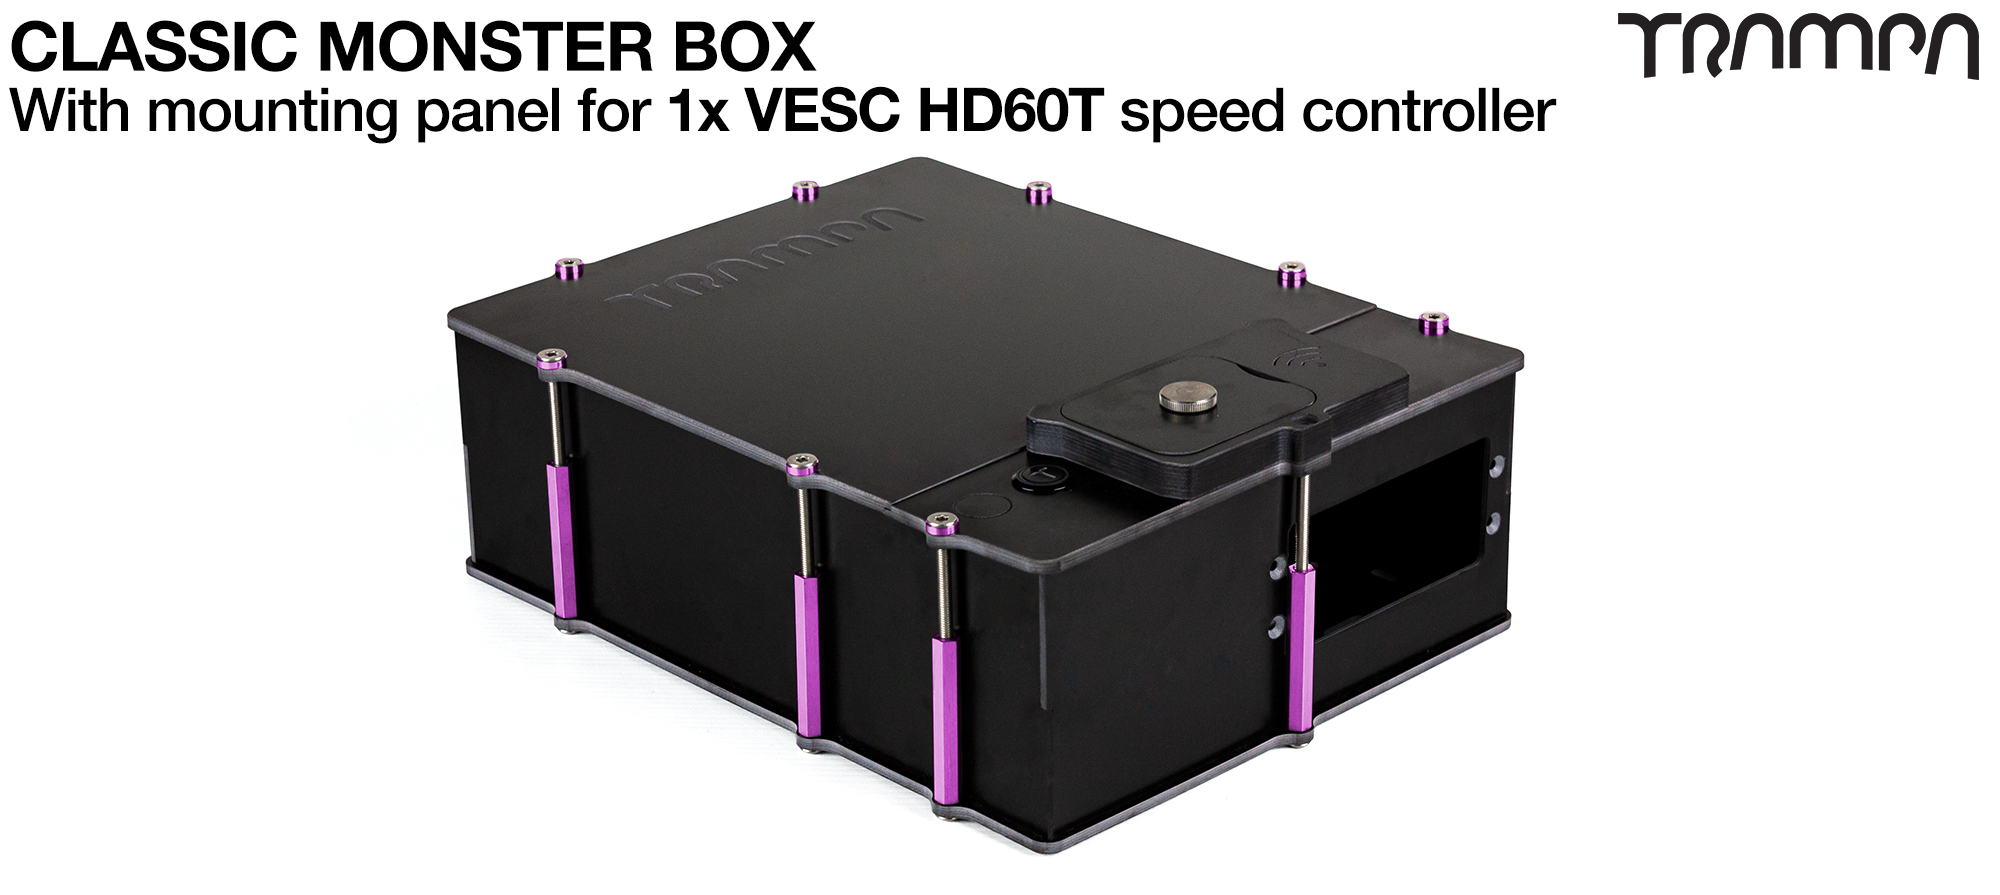 Classic MONSTER Box with Mounting Panel to fit 1x VESC HD-60T